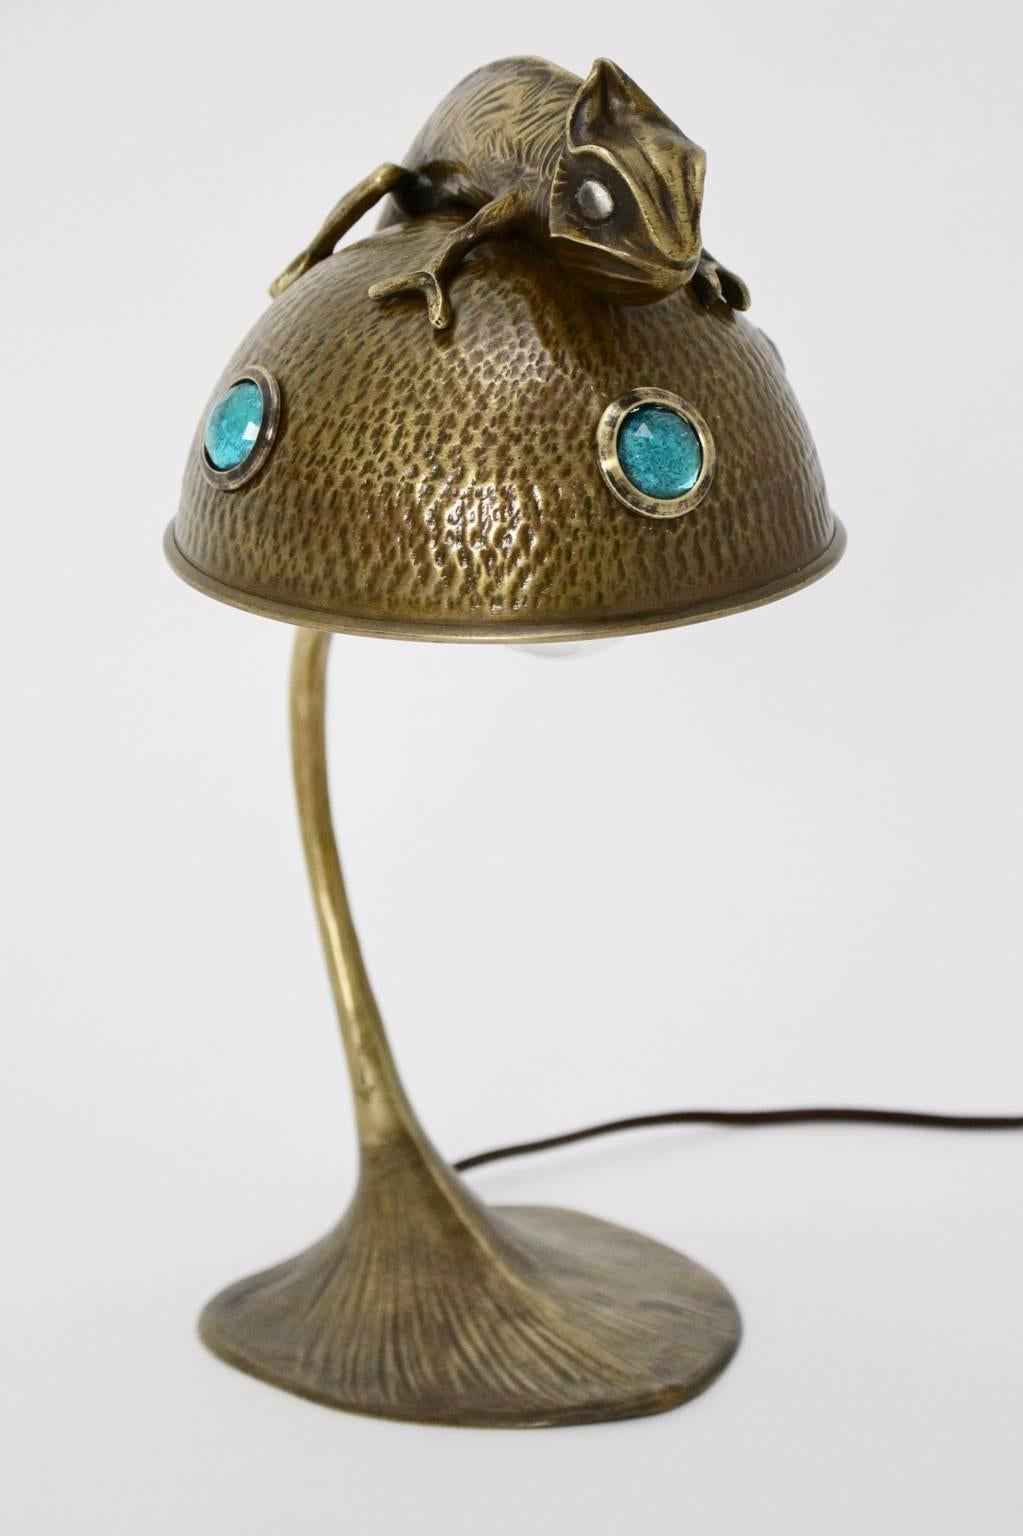 Lovely bronze table lamp Art Nouveau, France.
A Chamaeleon with colorless glass eyes is sitting on the dome shade. The stem of the table lamp looks like a plant stem.
The table lamp shade is further decorated with three green glass eyes and shows